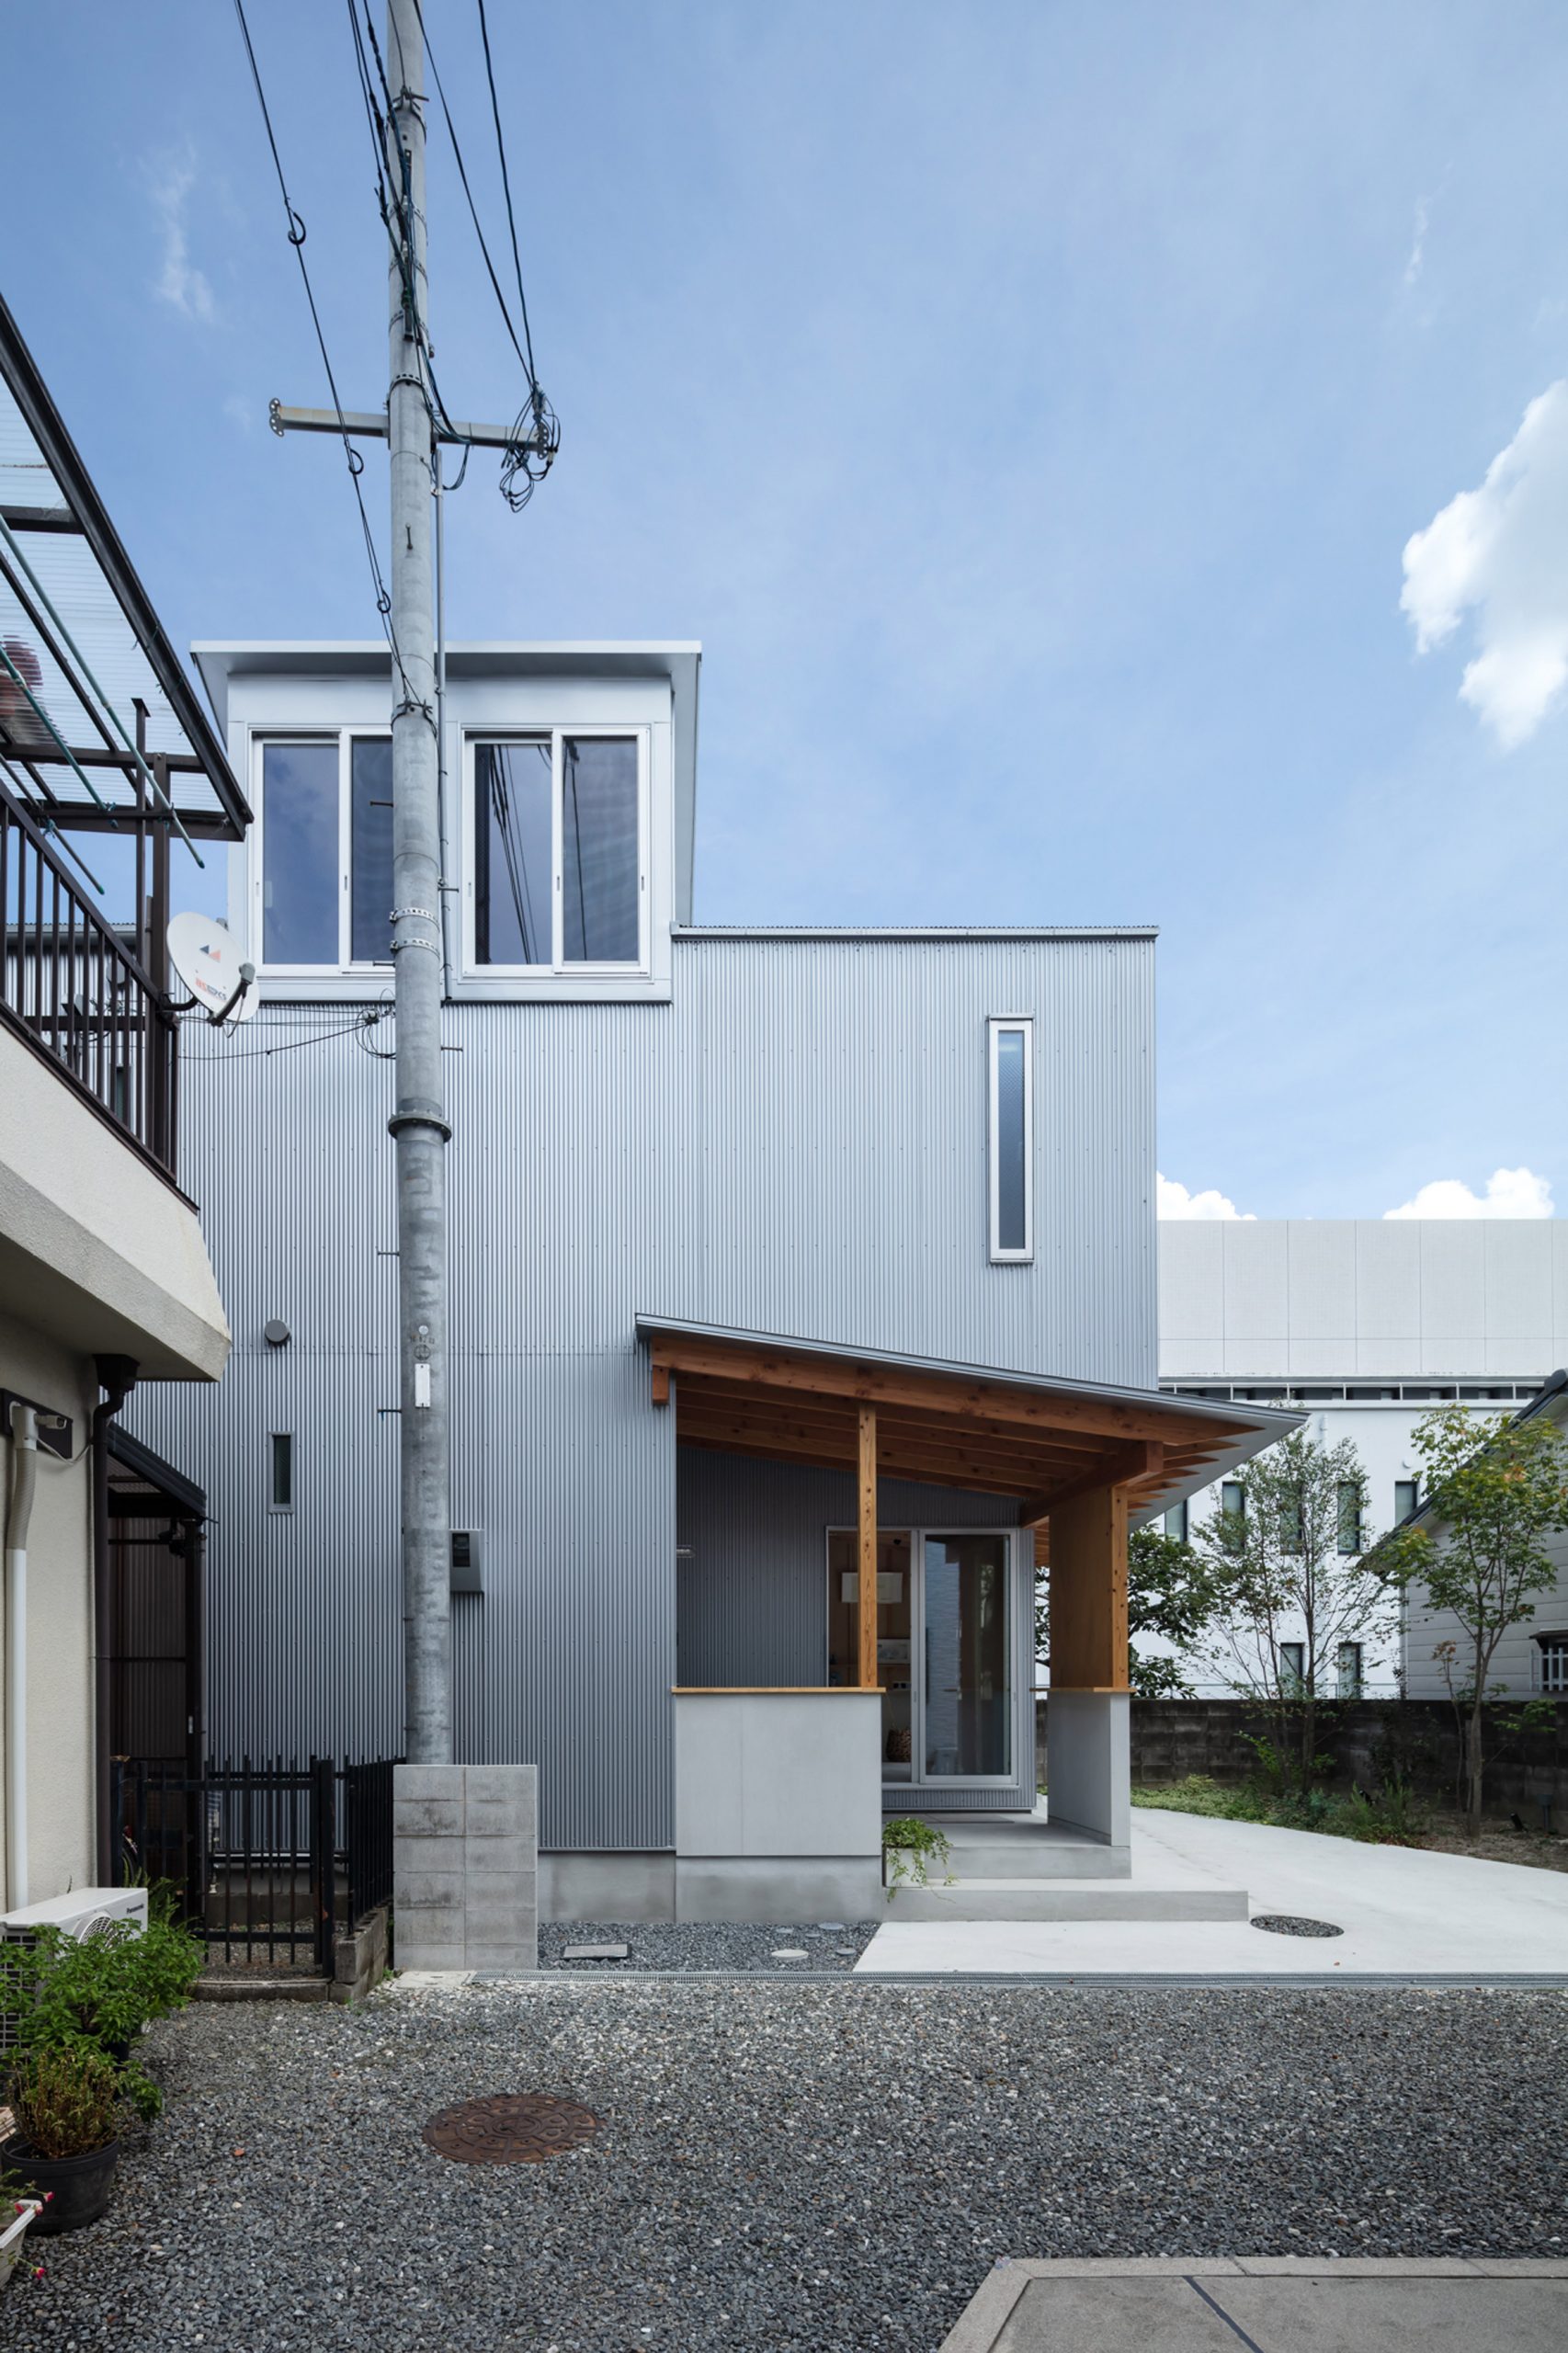 A Japanese house clad in corrugated metal